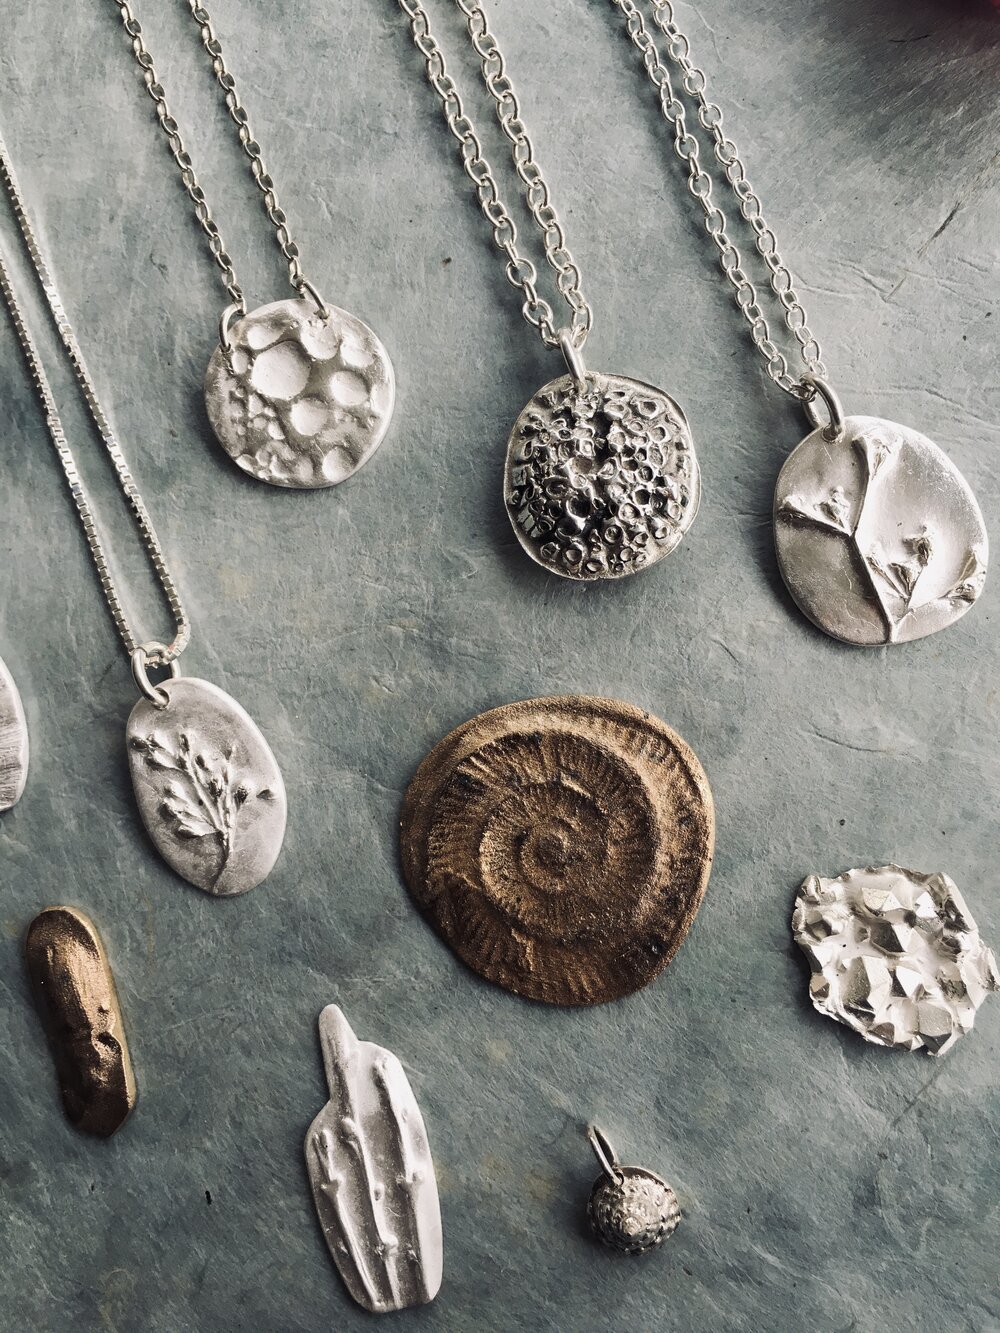 Metal clay and Silver-clay make real jewelry out of fine silver. –